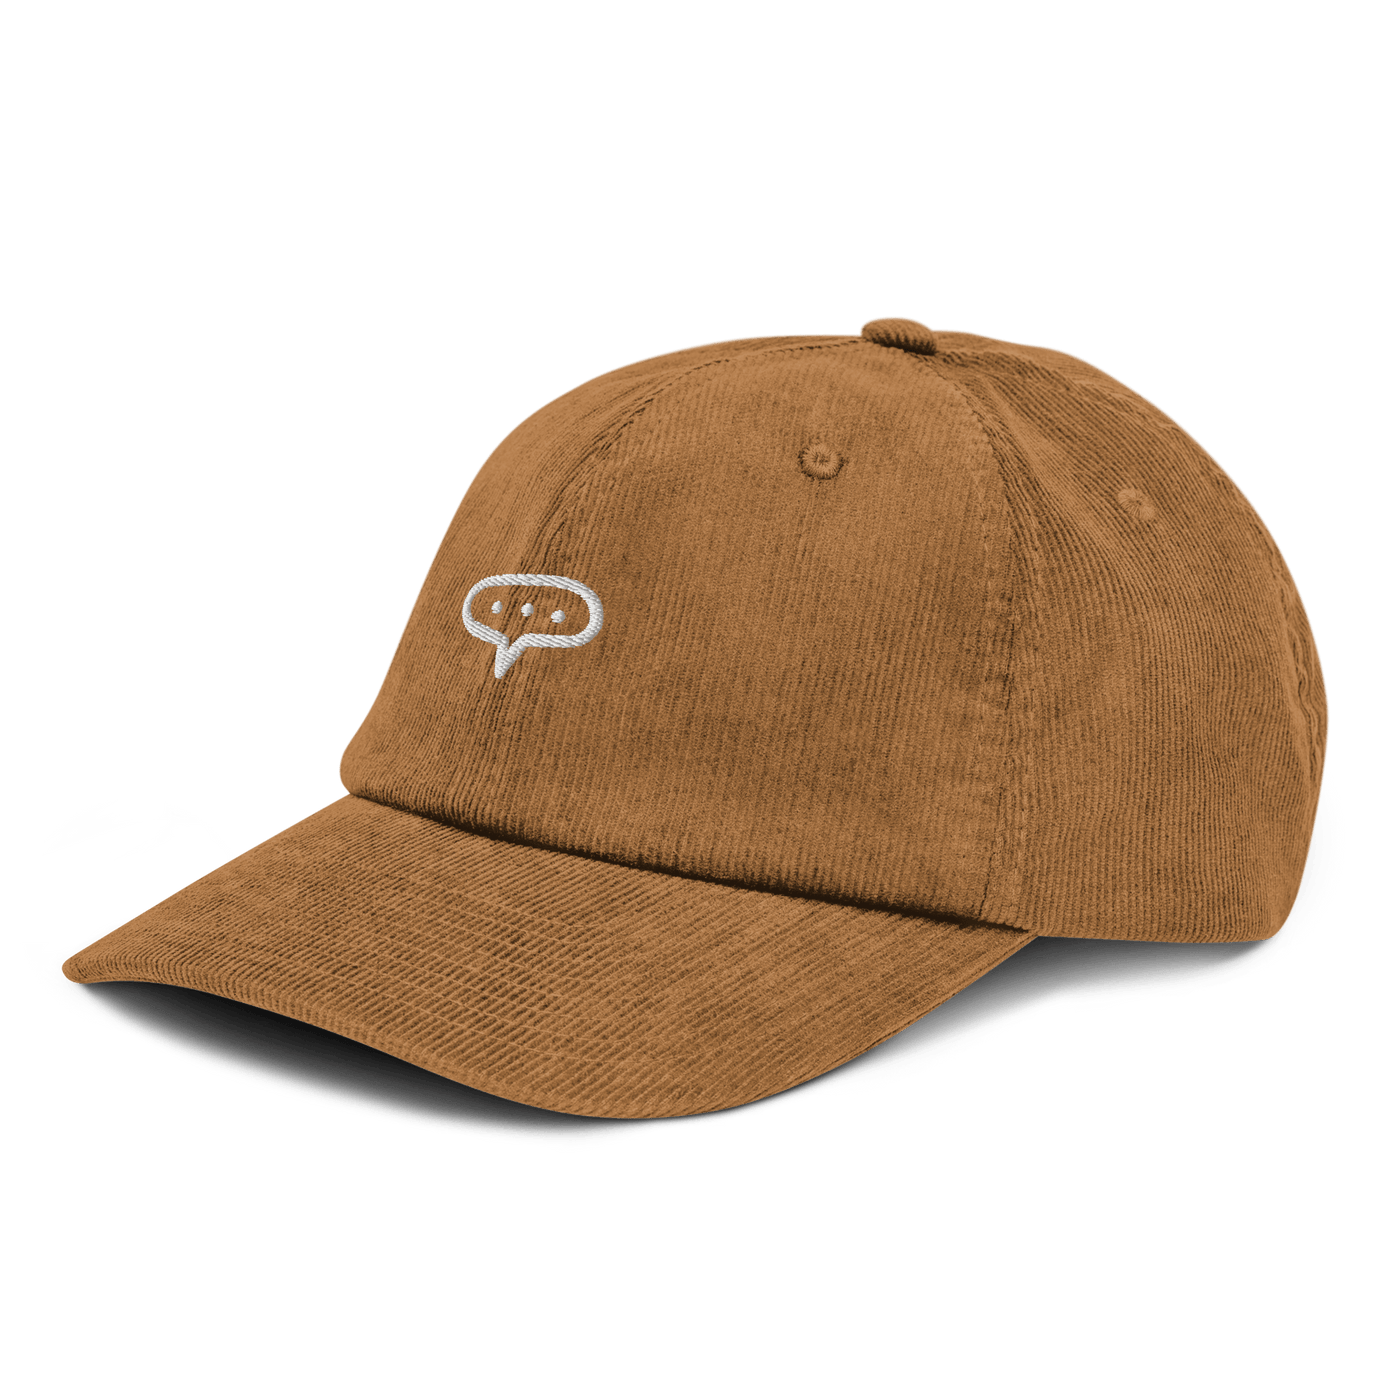 Thinking Corduroy hat - Dark Olive - - Just Another Cap Store